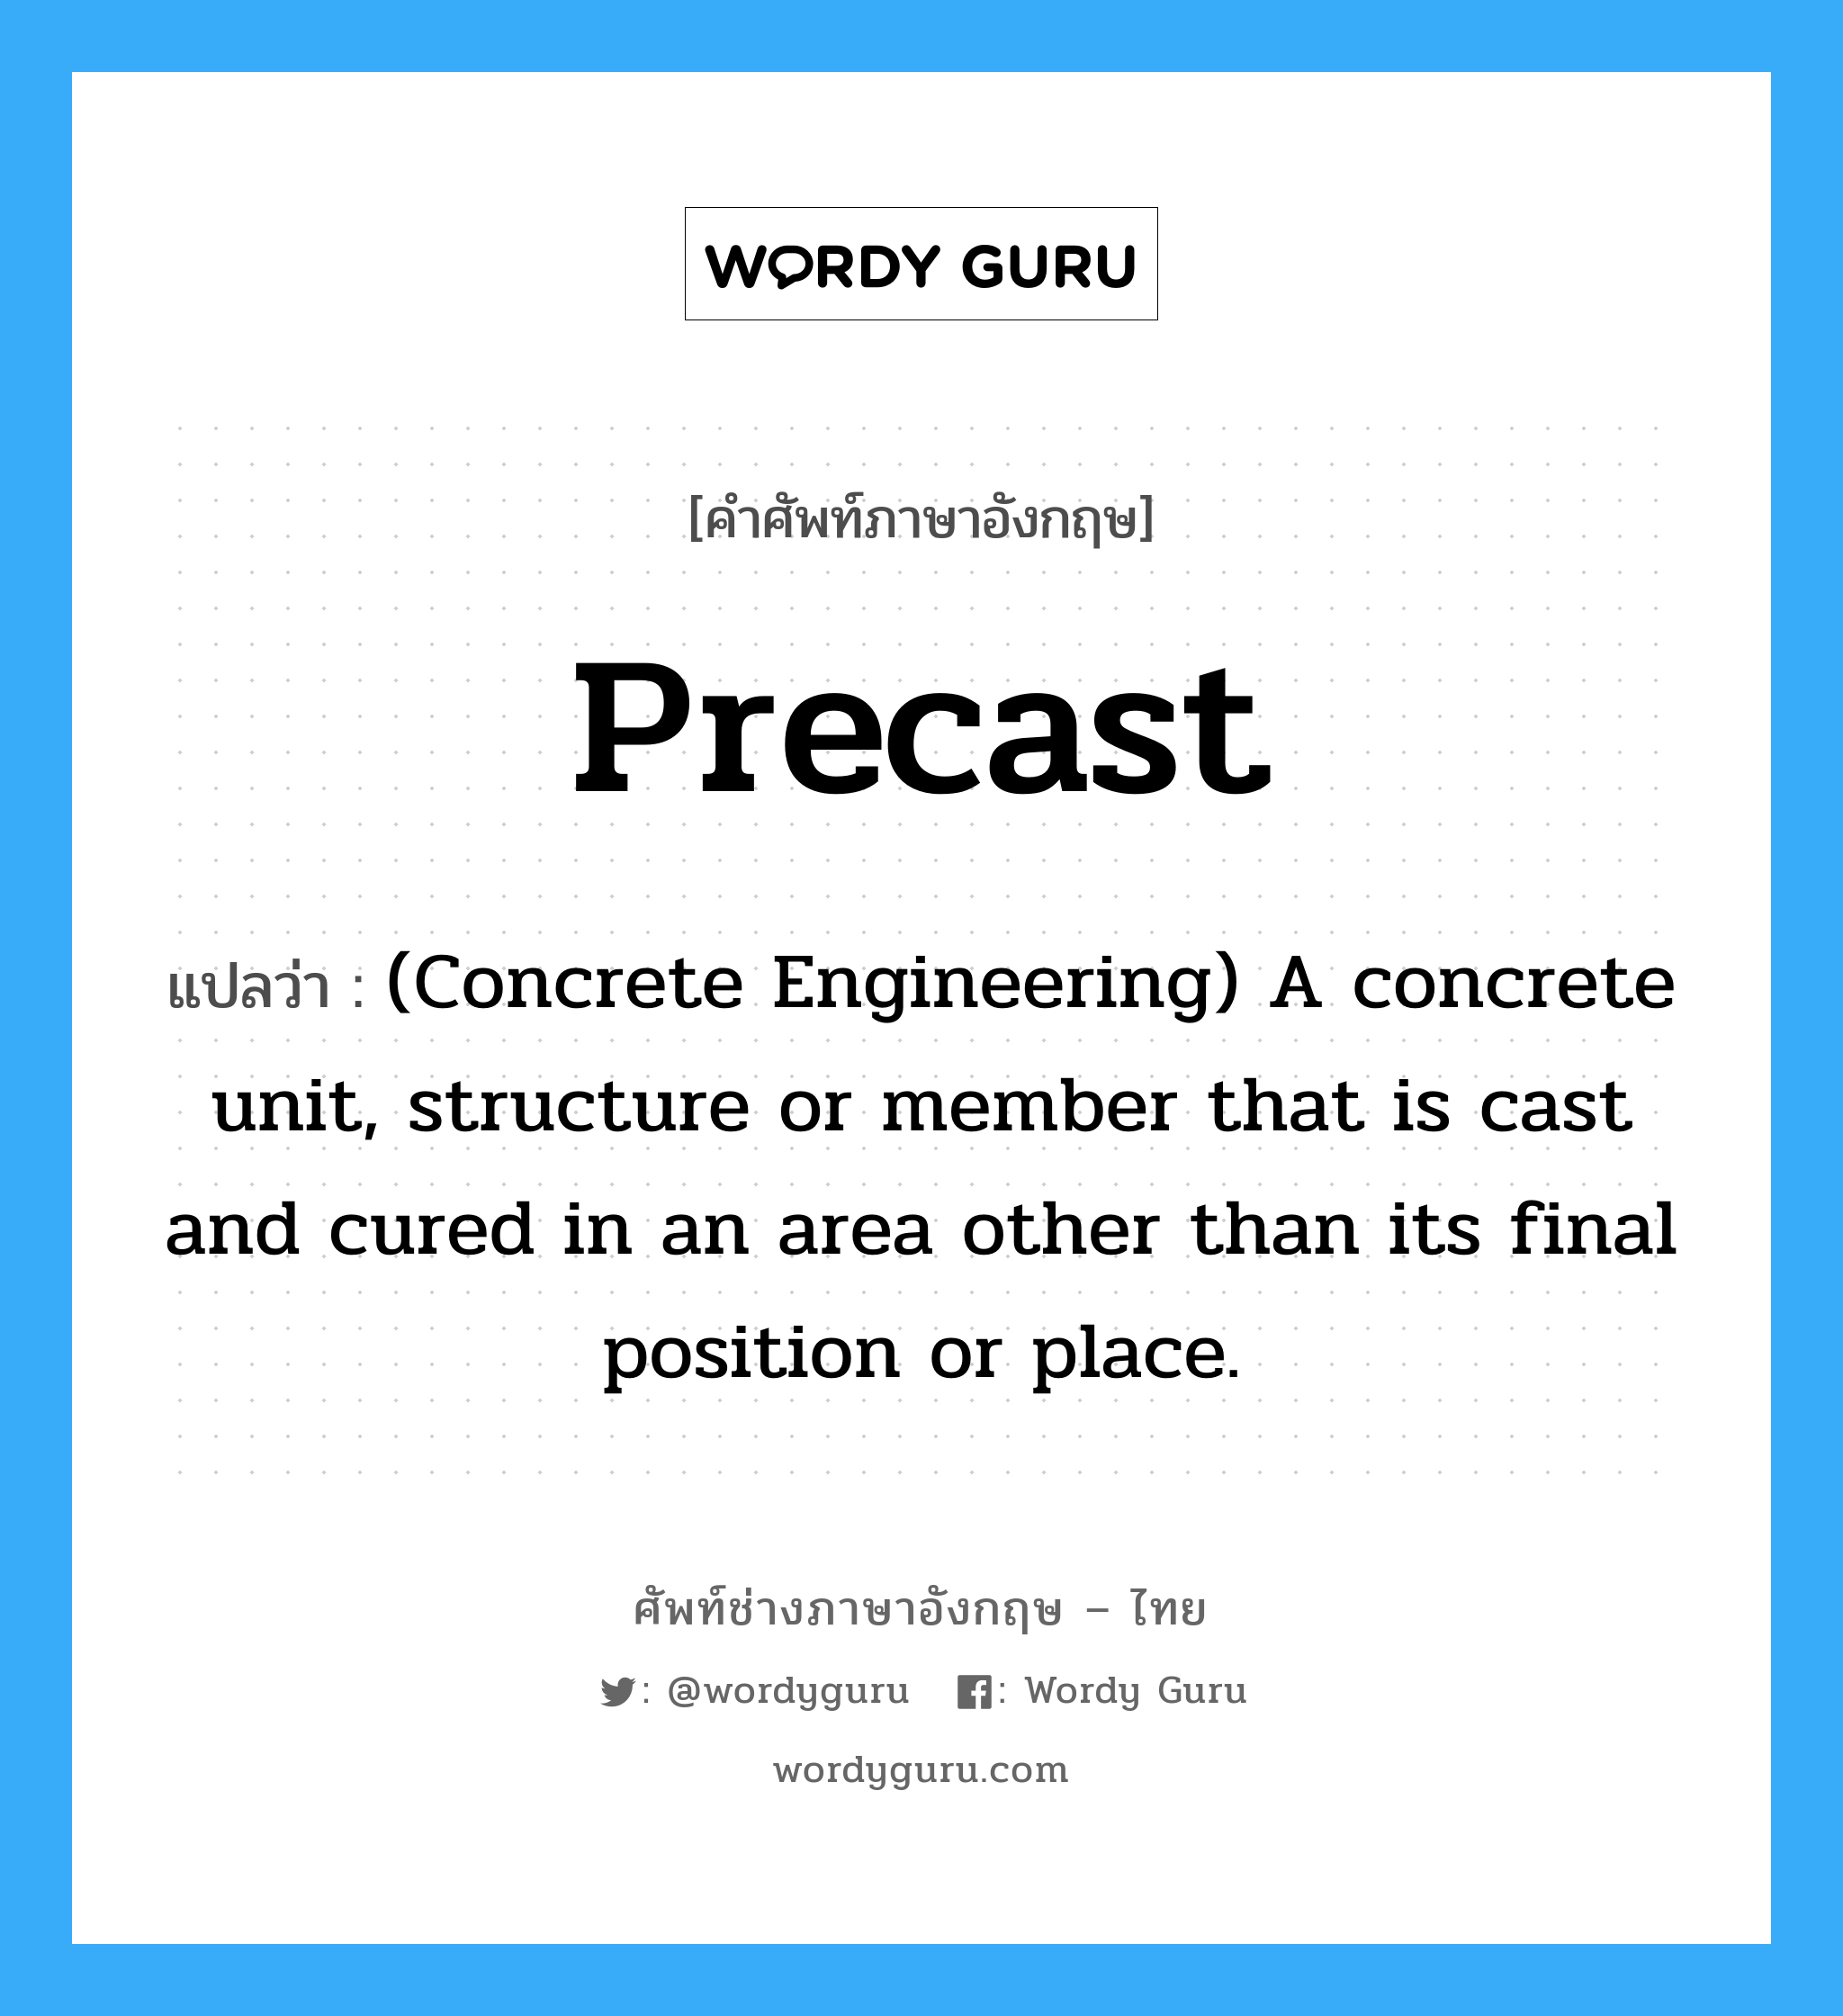 Precast แปลว่า?, คำศัพท์ช่างภาษาอังกฤษ - ไทย Precast คำศัพท์ภาษาอังกฤษ Precast แปลว่า (Concrete Engineering) A concrete unit, structure or member that is cast and cured in an area other than its final position or place.